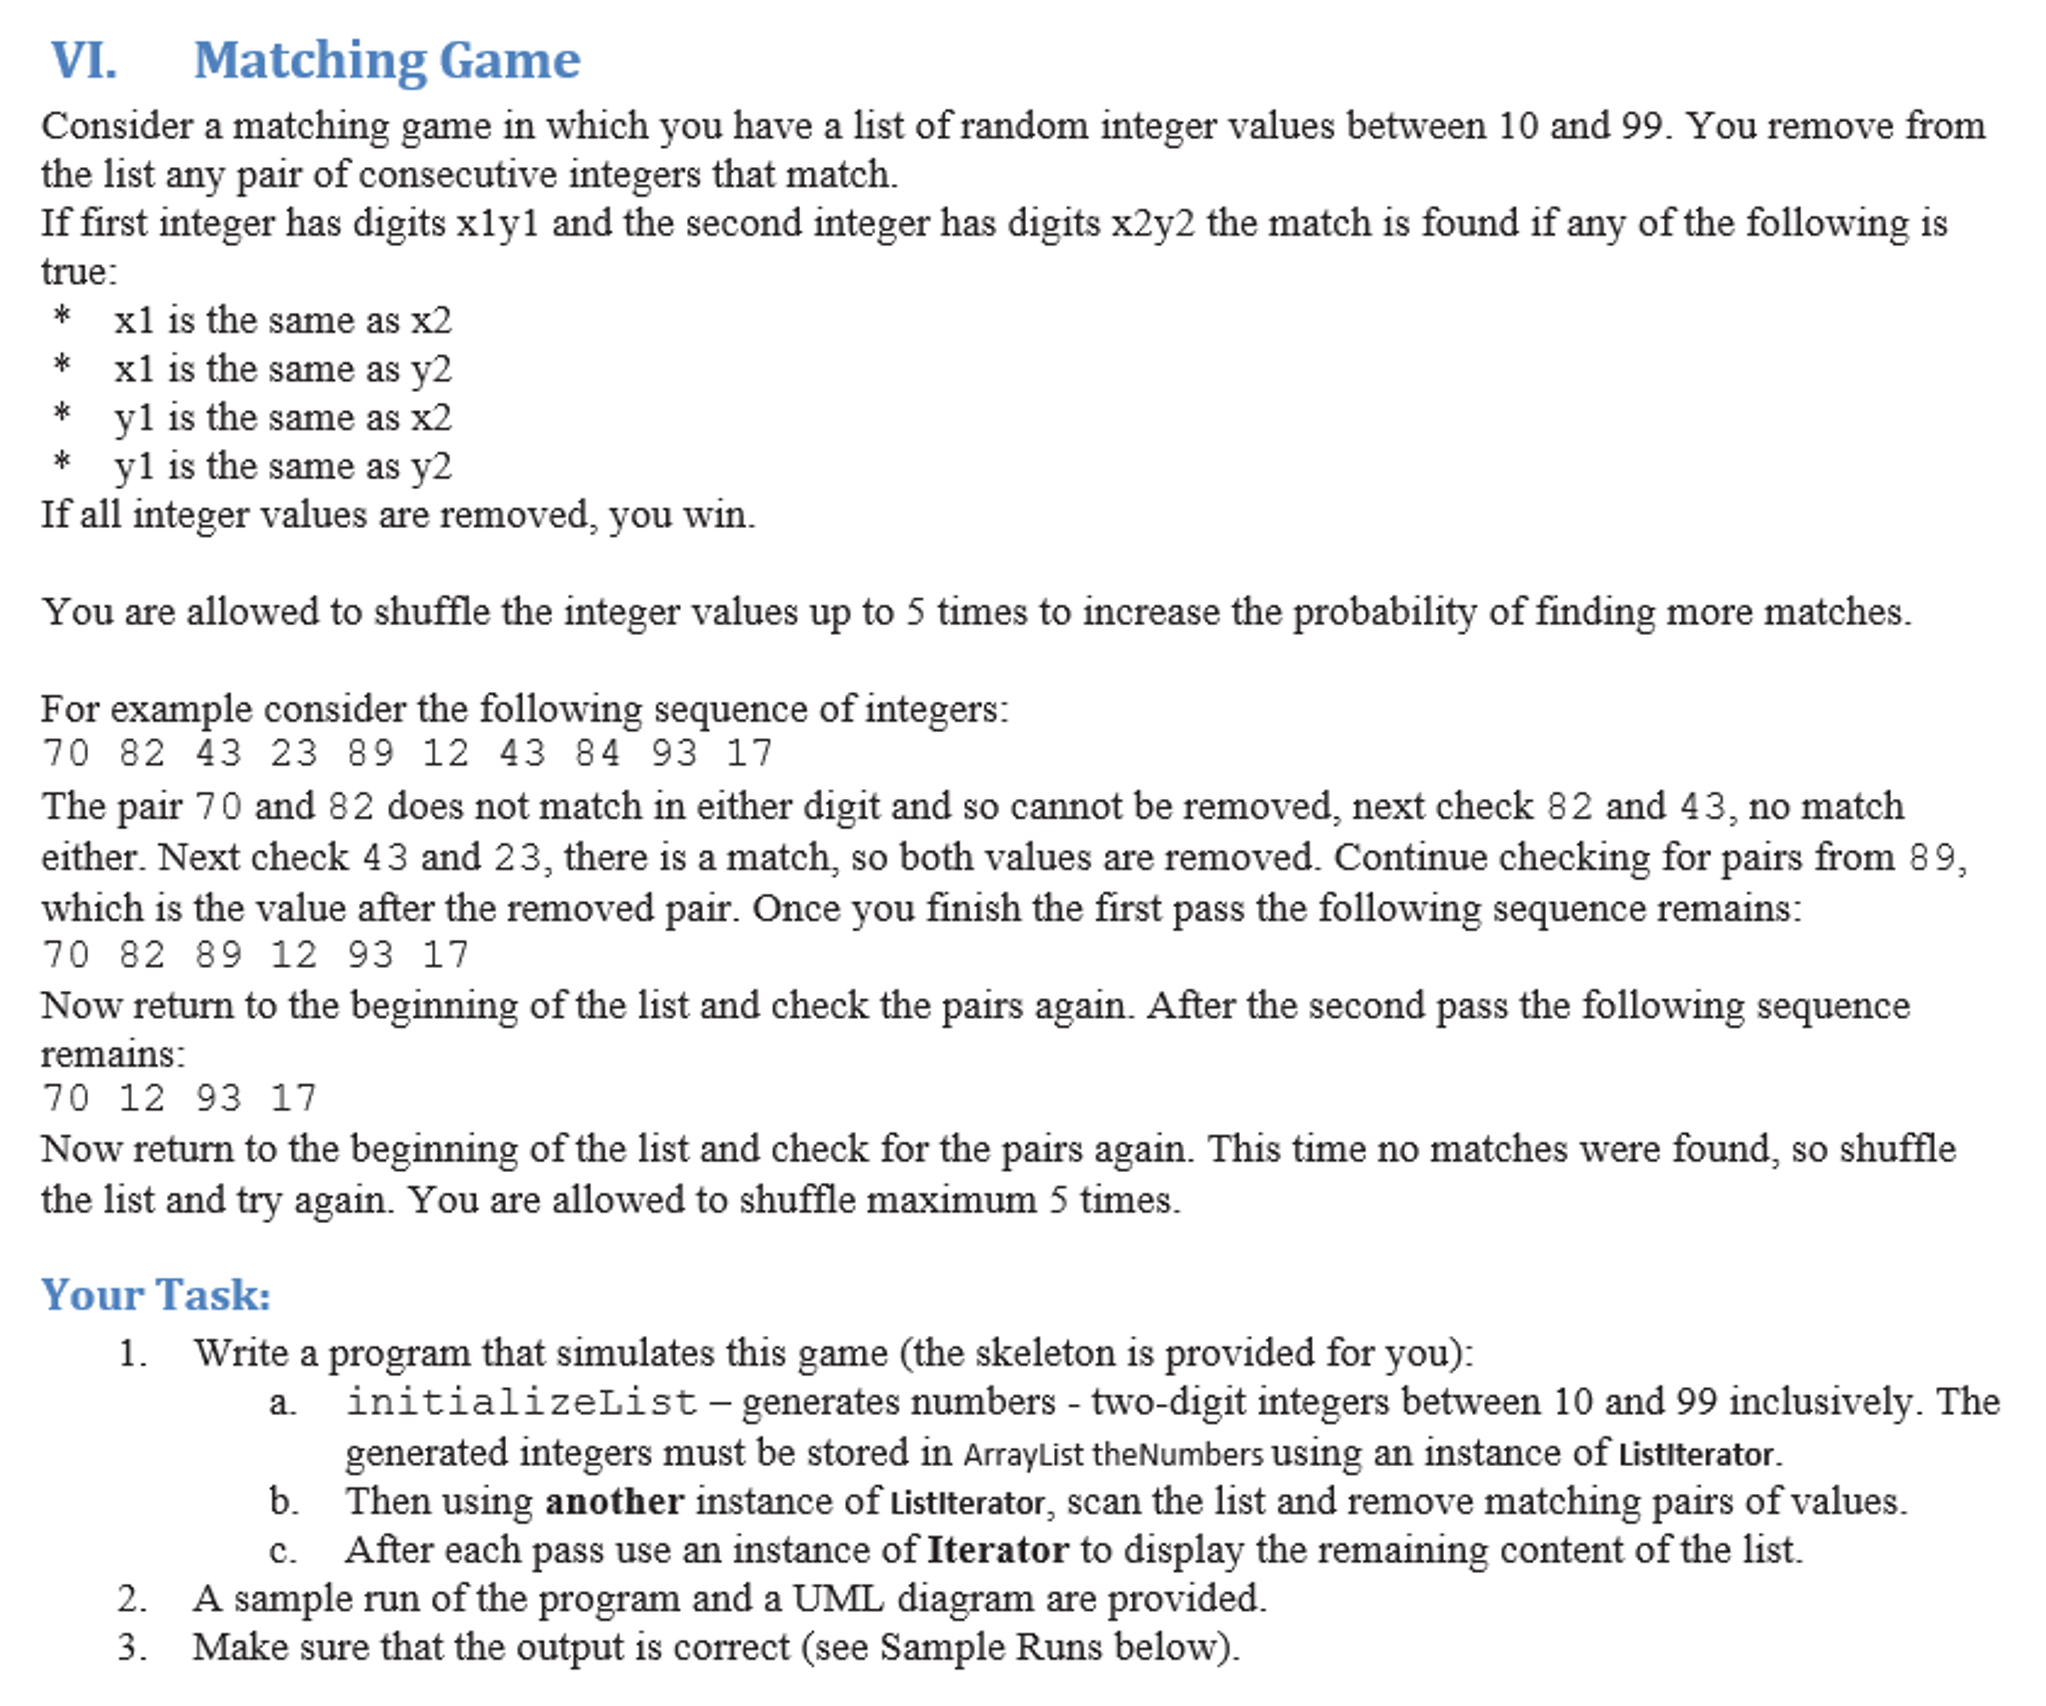 VI. Matching Game Consider A Matching Game In Whic...